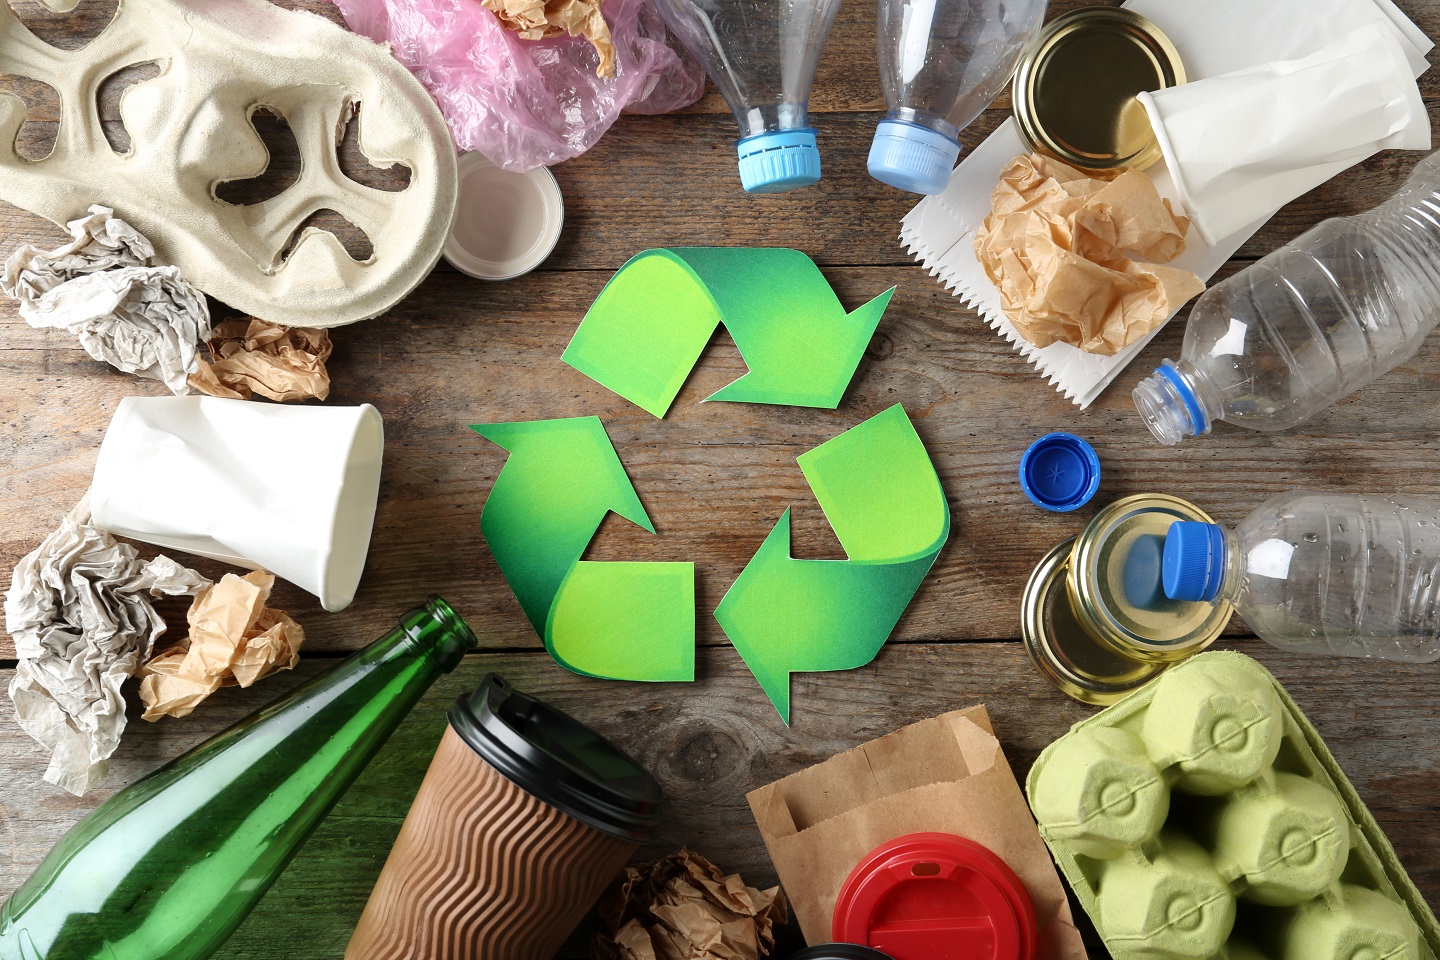 Ecoterra: The Crypto Startup That’s Changing the Game of Recycling – Here’s What You Need to Know